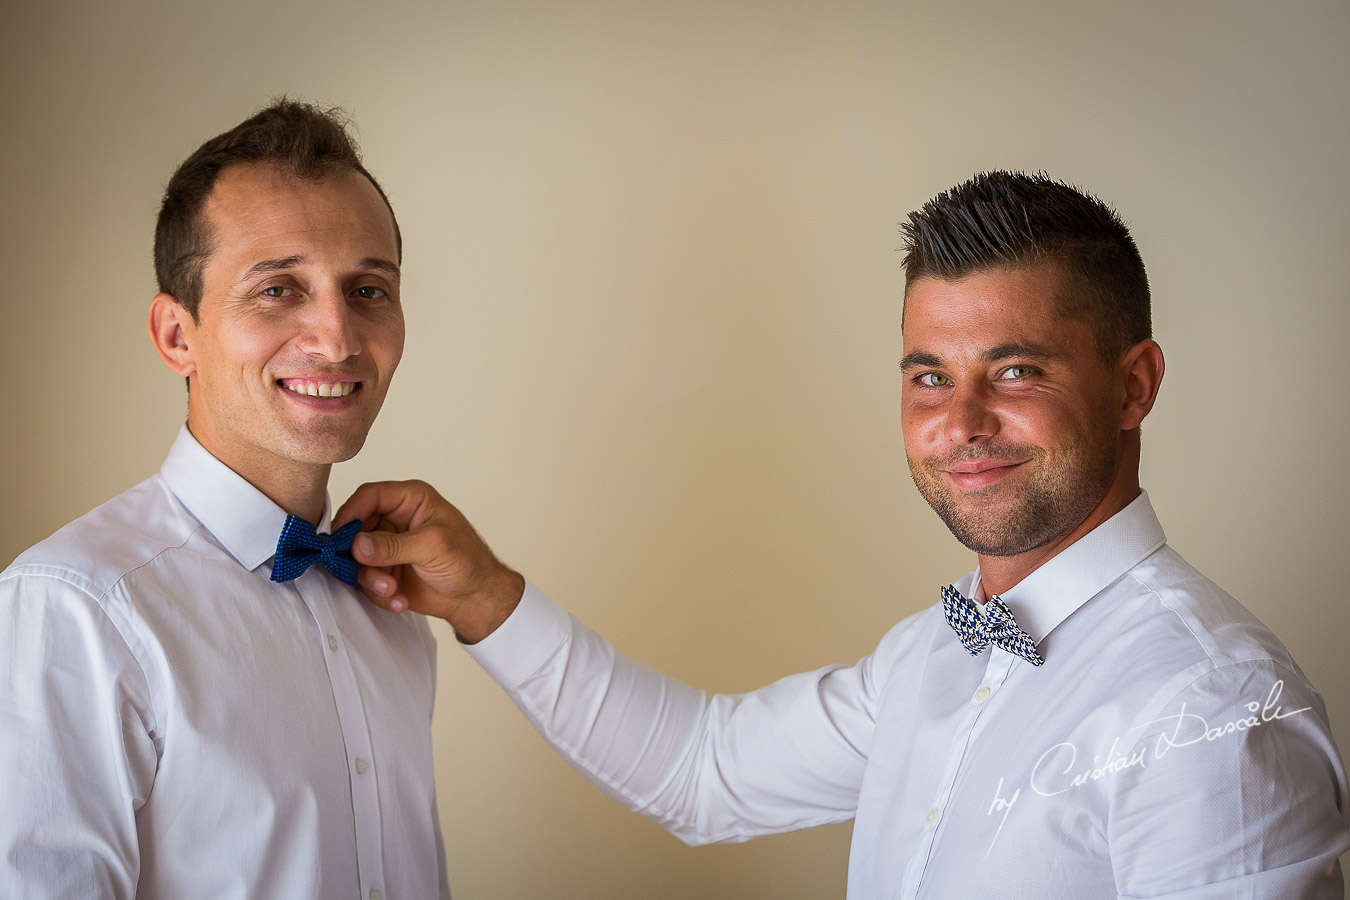 Groom and best man getting ready at Elias Beach Hotel in Limassol